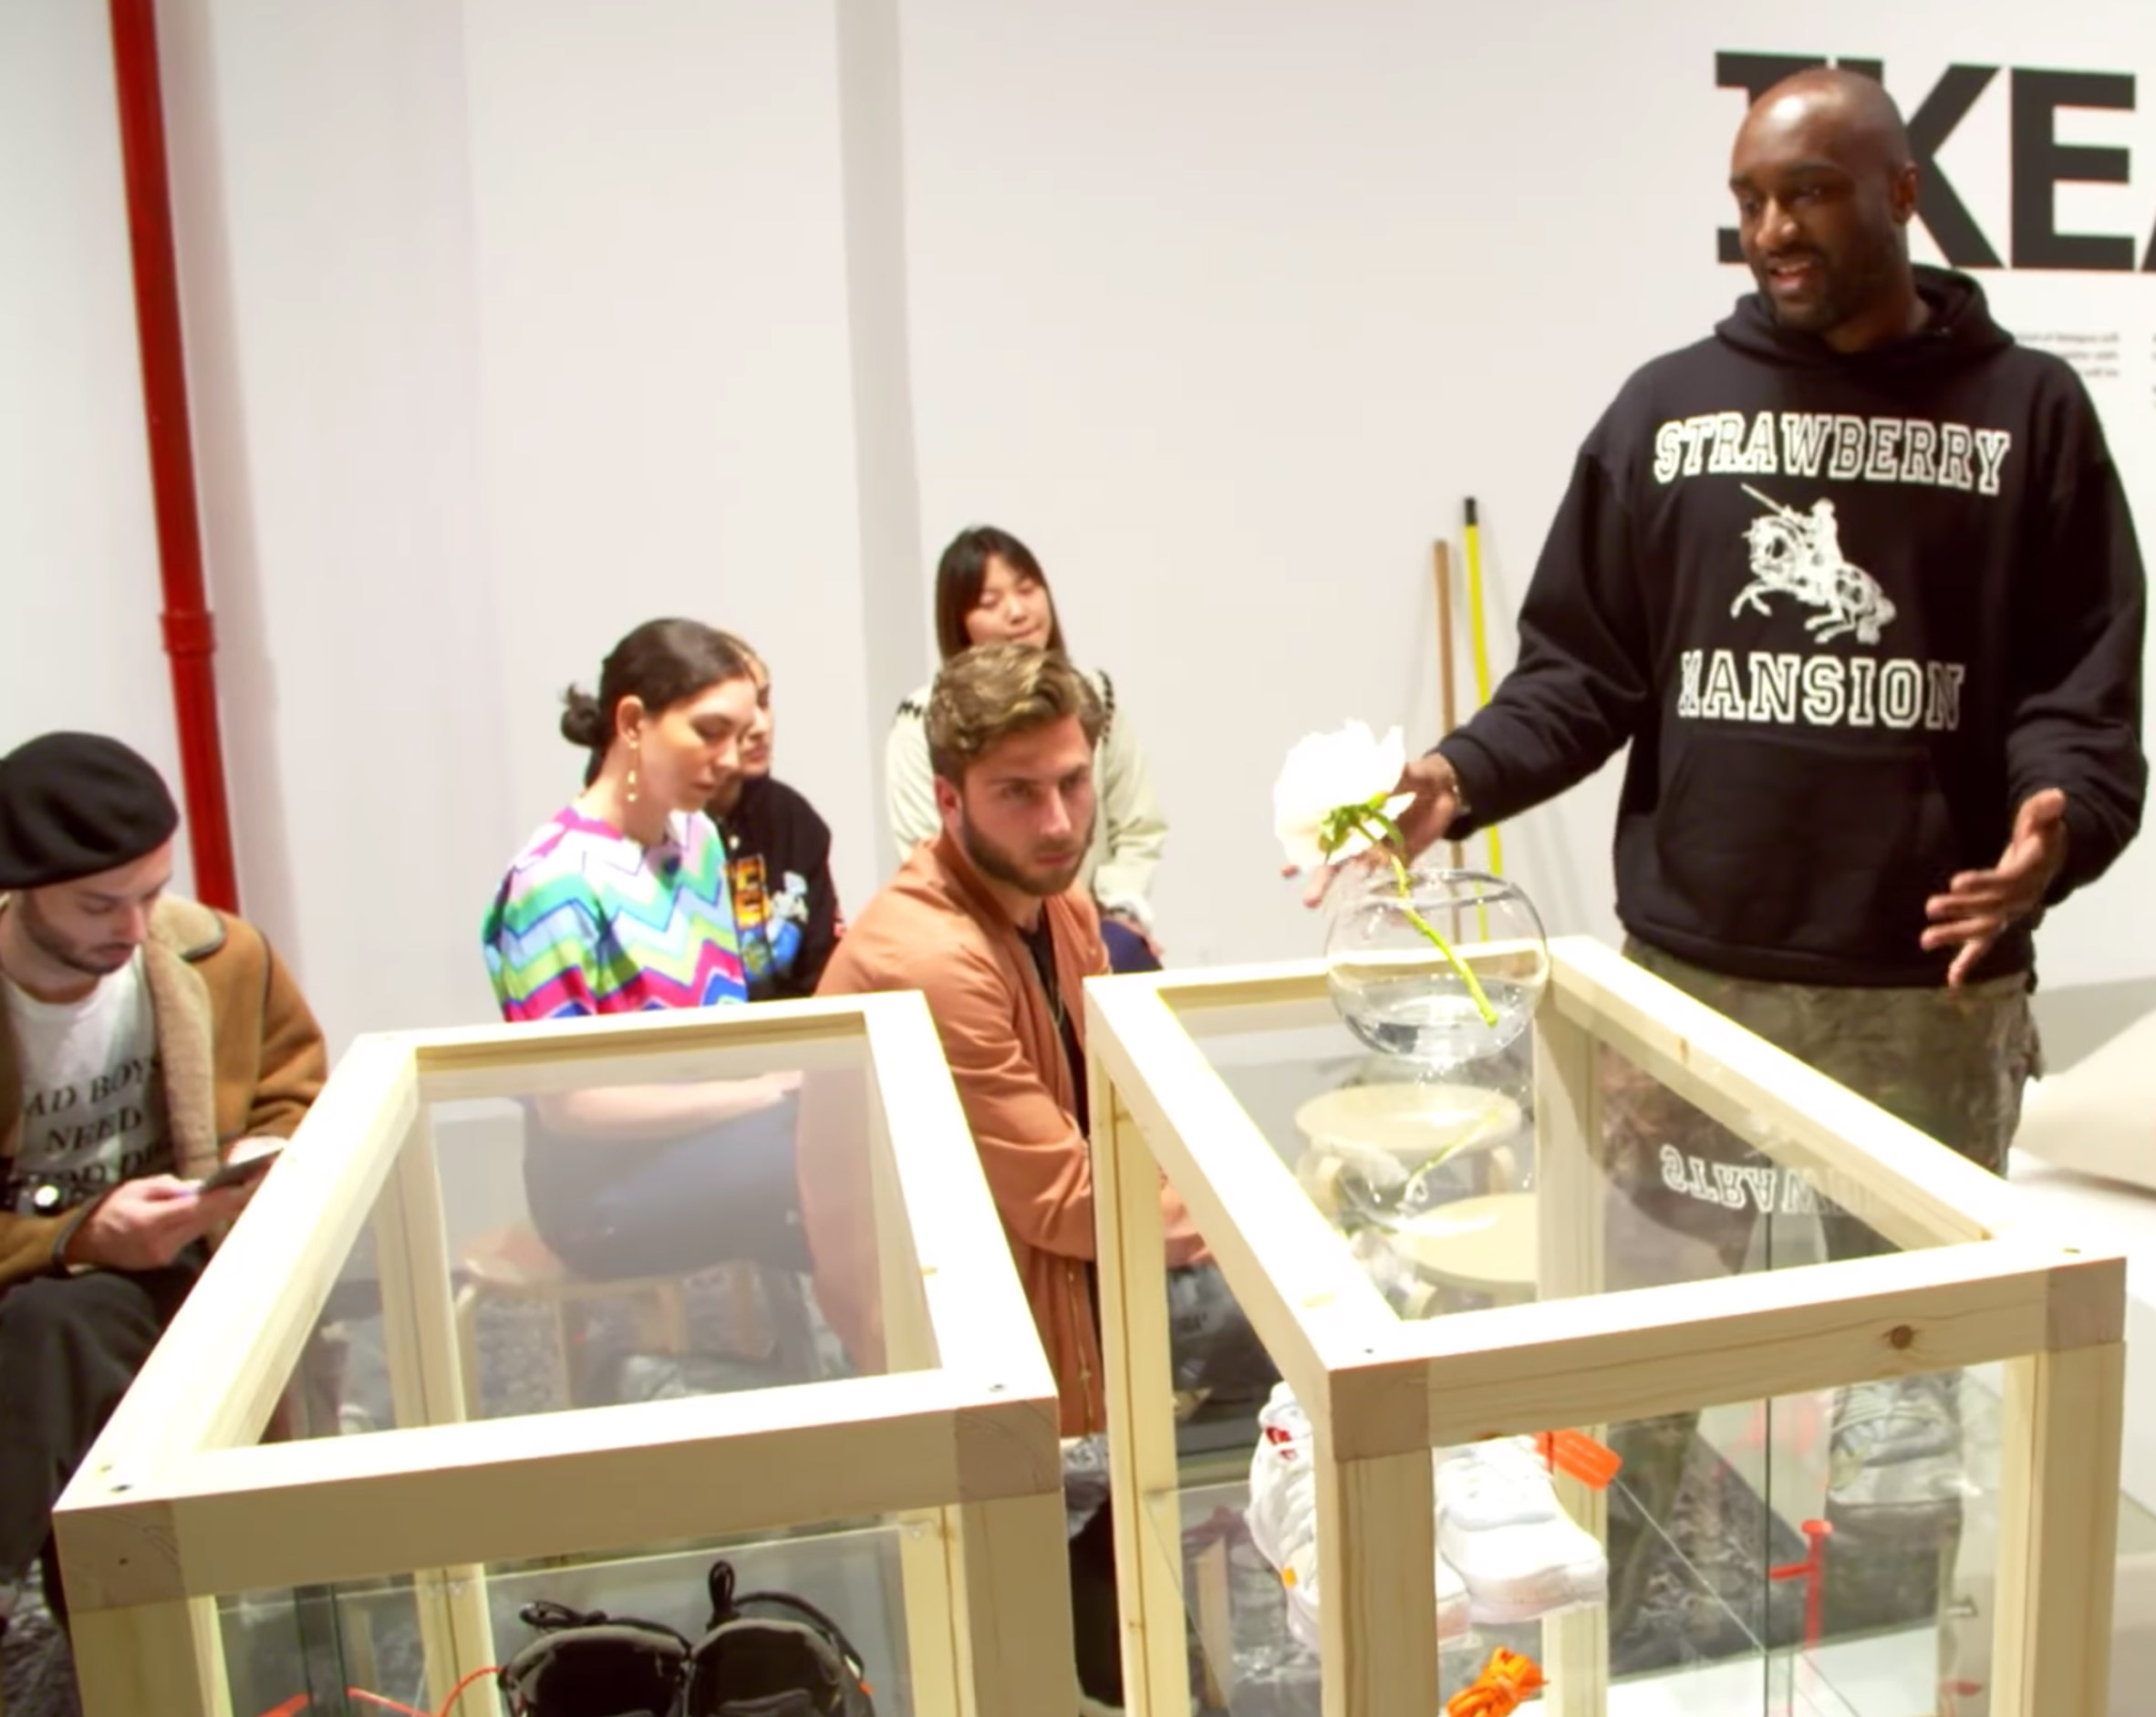 Virgil Abloh marks his furniture design debut with IKEA